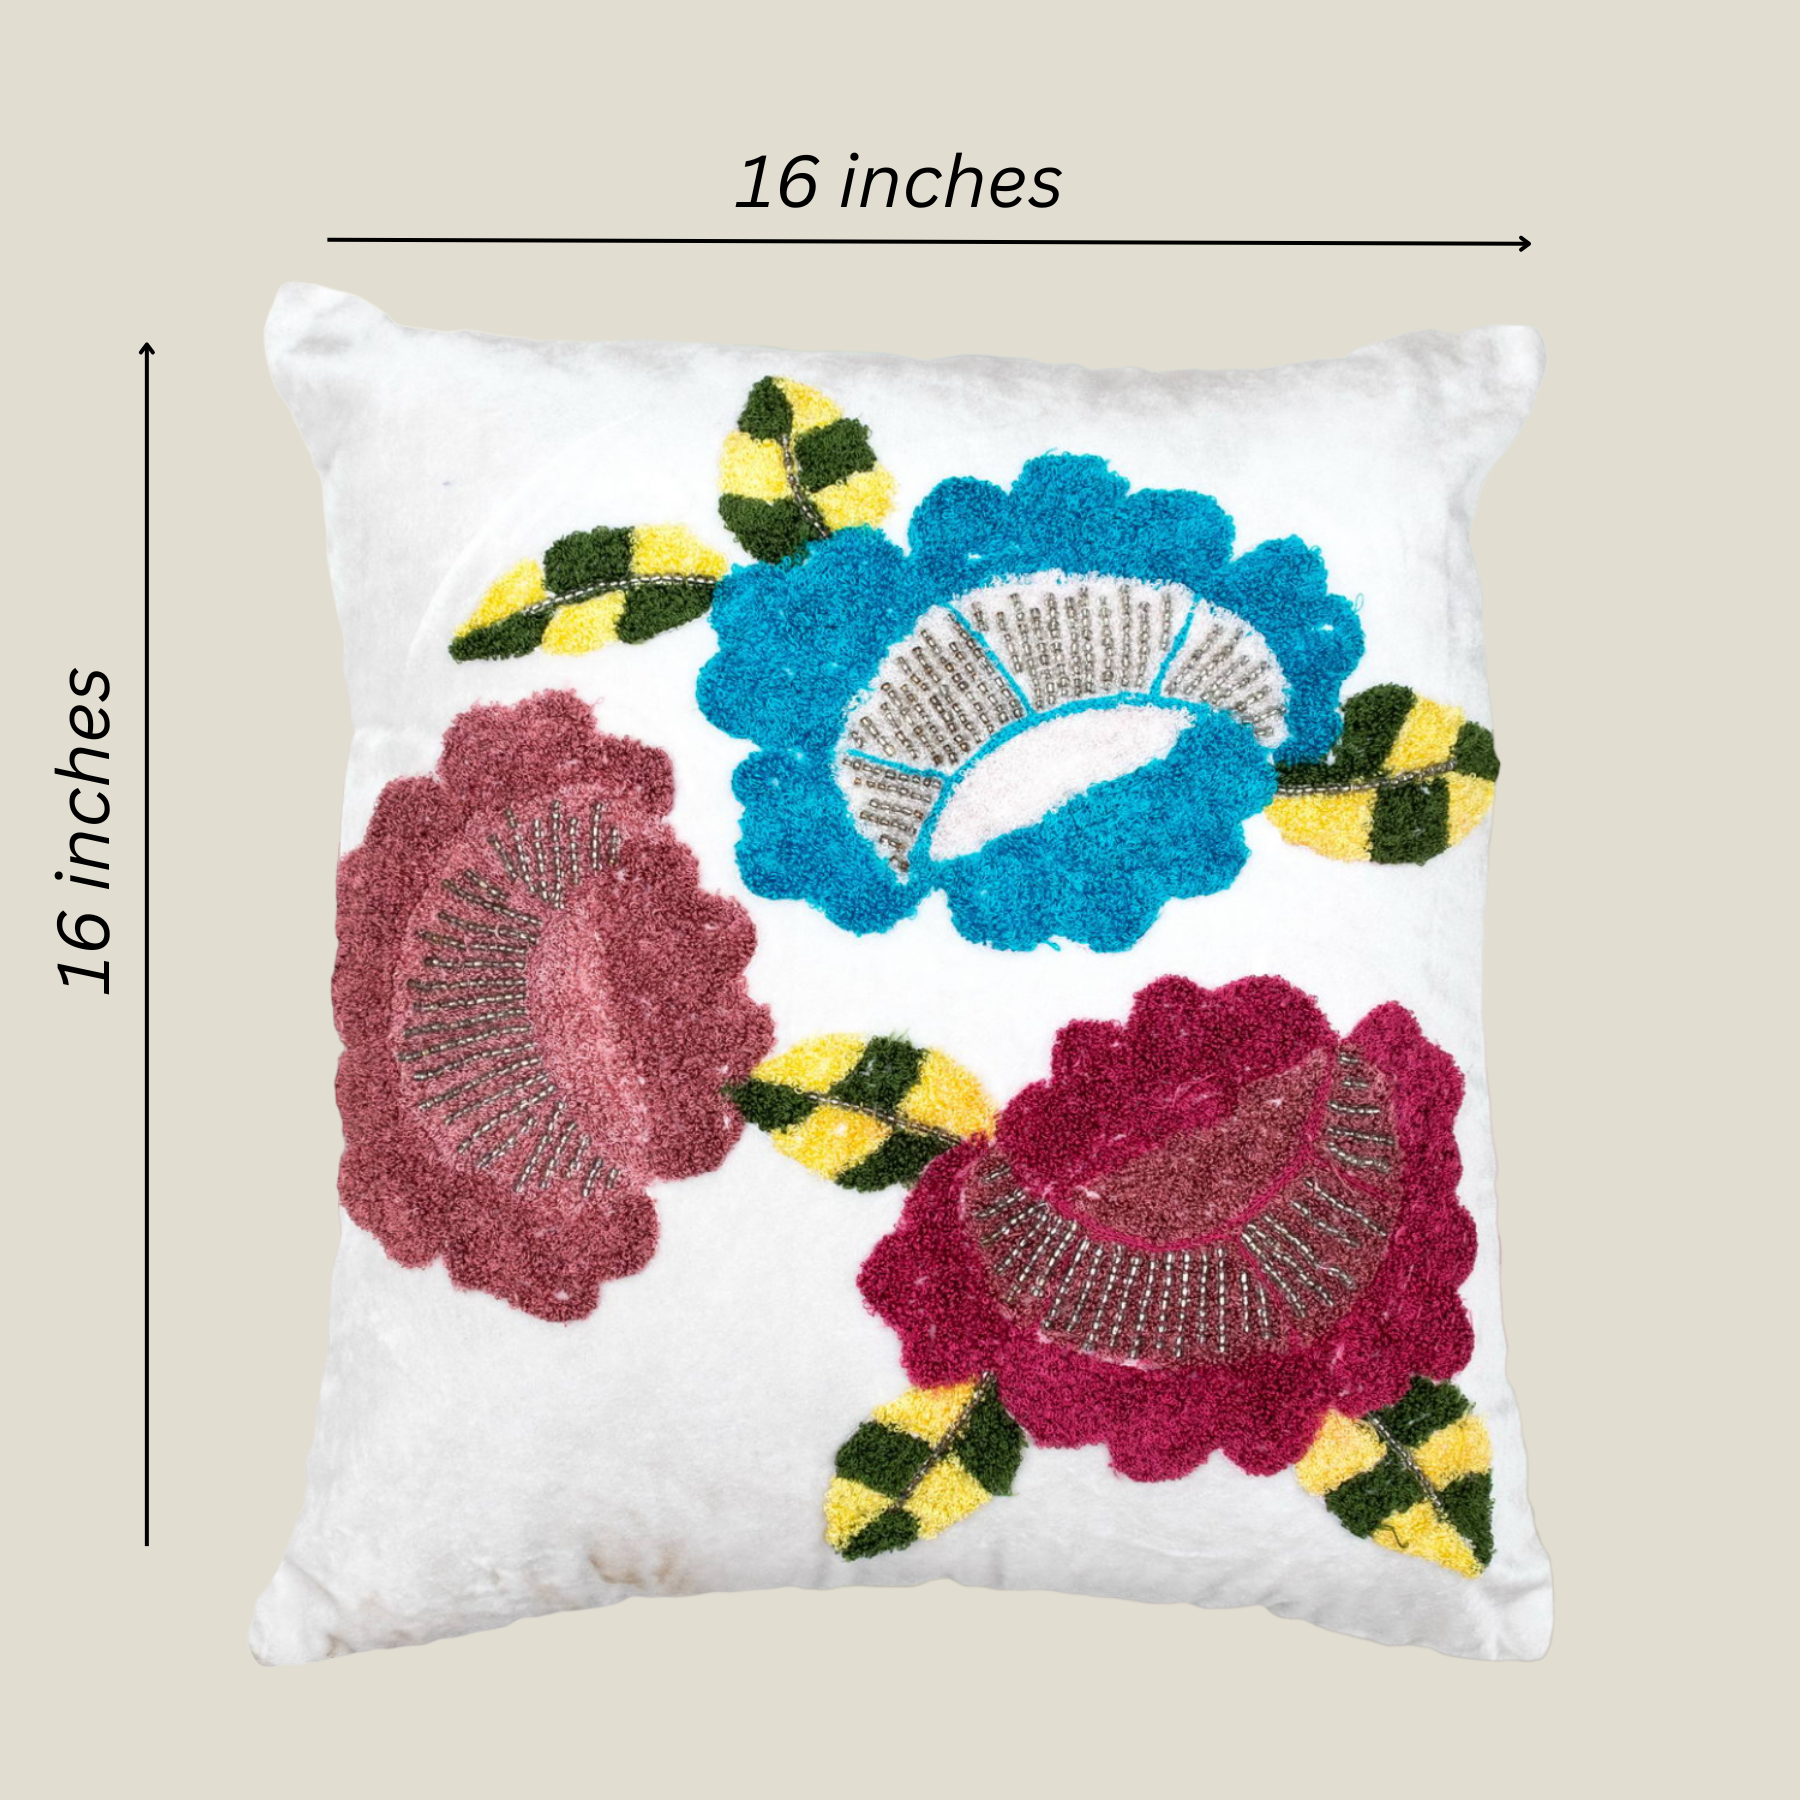 The Luxelife White Velvet Floral Embroidered Cushion Cover